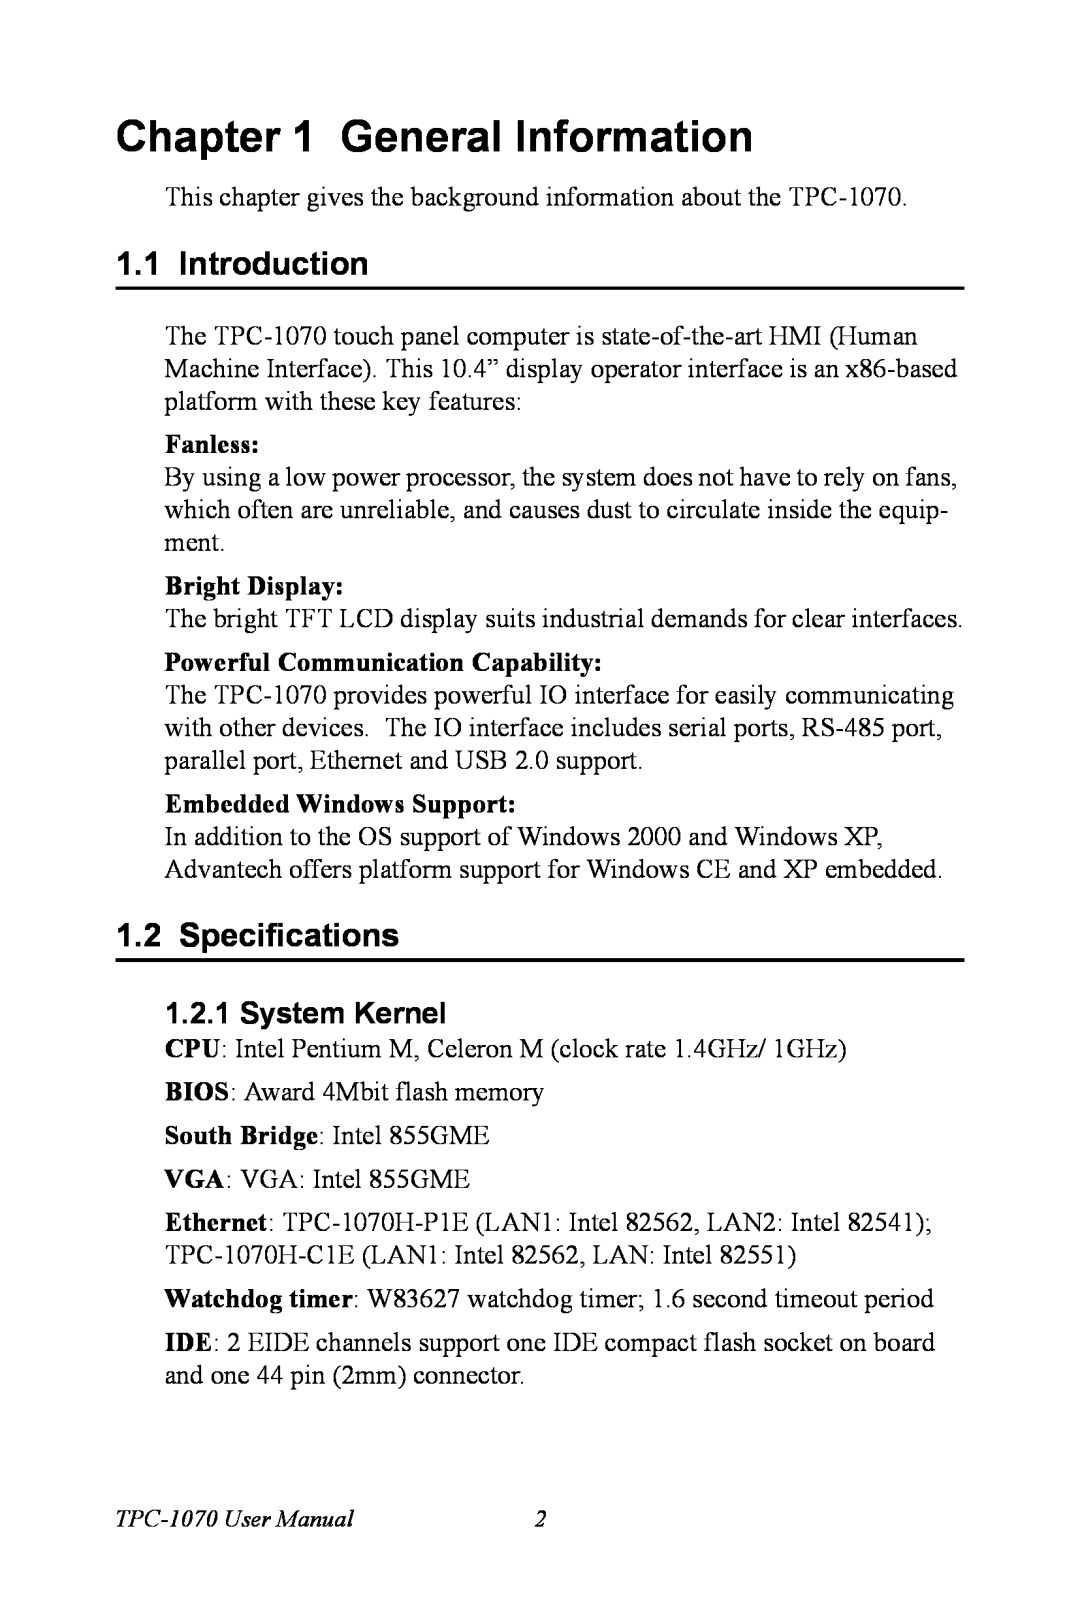 Intel TPC-1070 user manual General Information, Introduction, Specifications, System Kernel, Fanless, Bright Display 